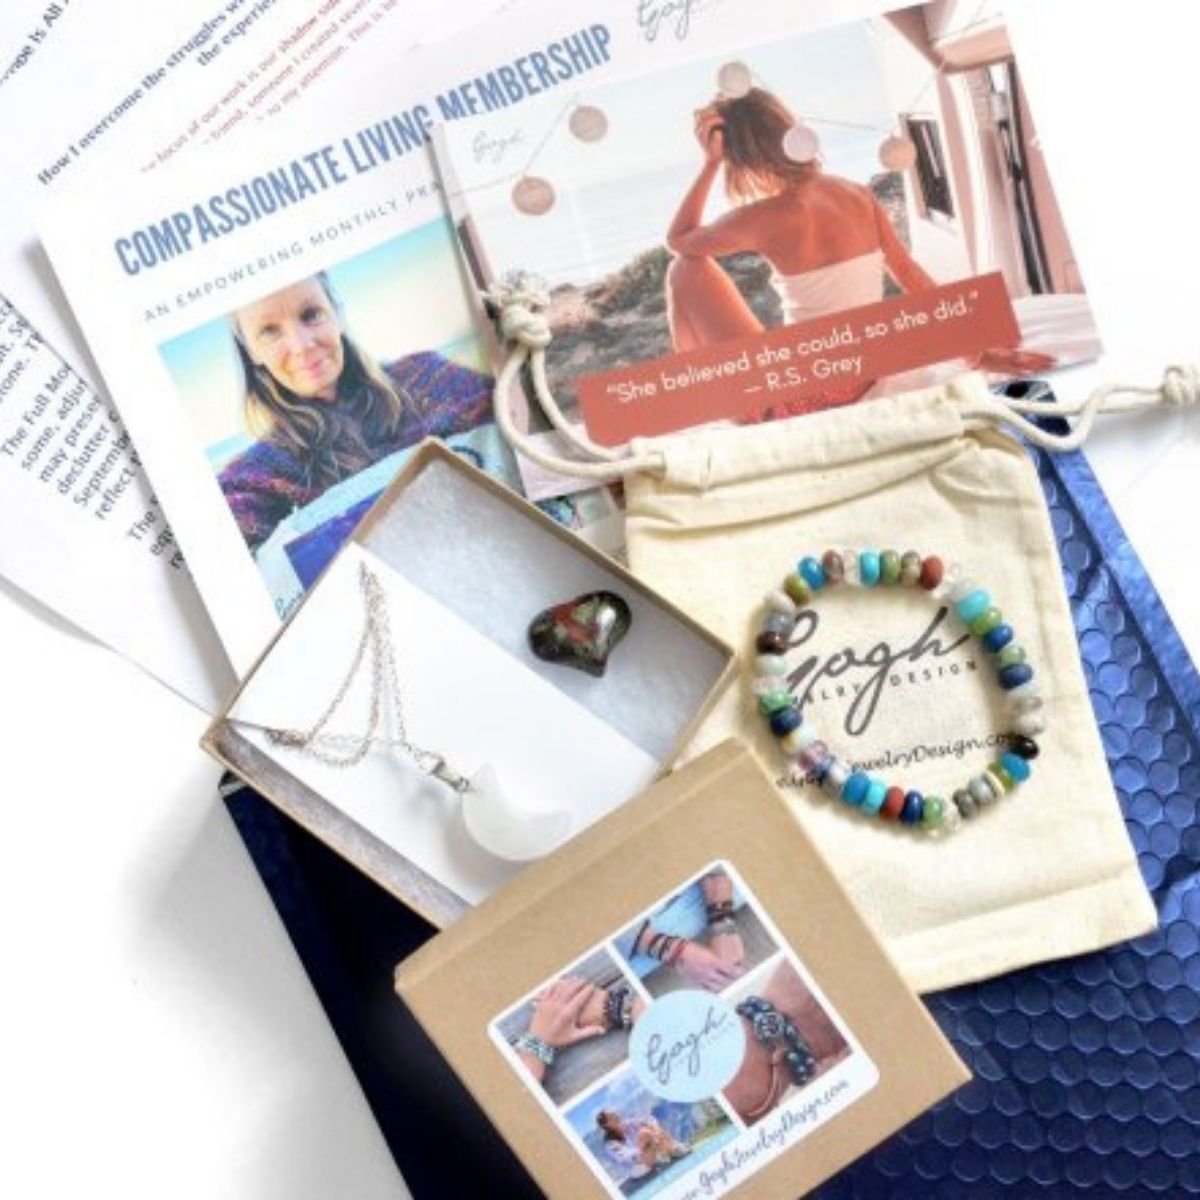 A subscription box for everyone who wants to live happy - even during a pandemic. Each monthly practice contains a personalized gemstone bracelet, necklace, a healing crystal, two meditation cards (one to keep / one to gift) and your astrology forecast for the month.